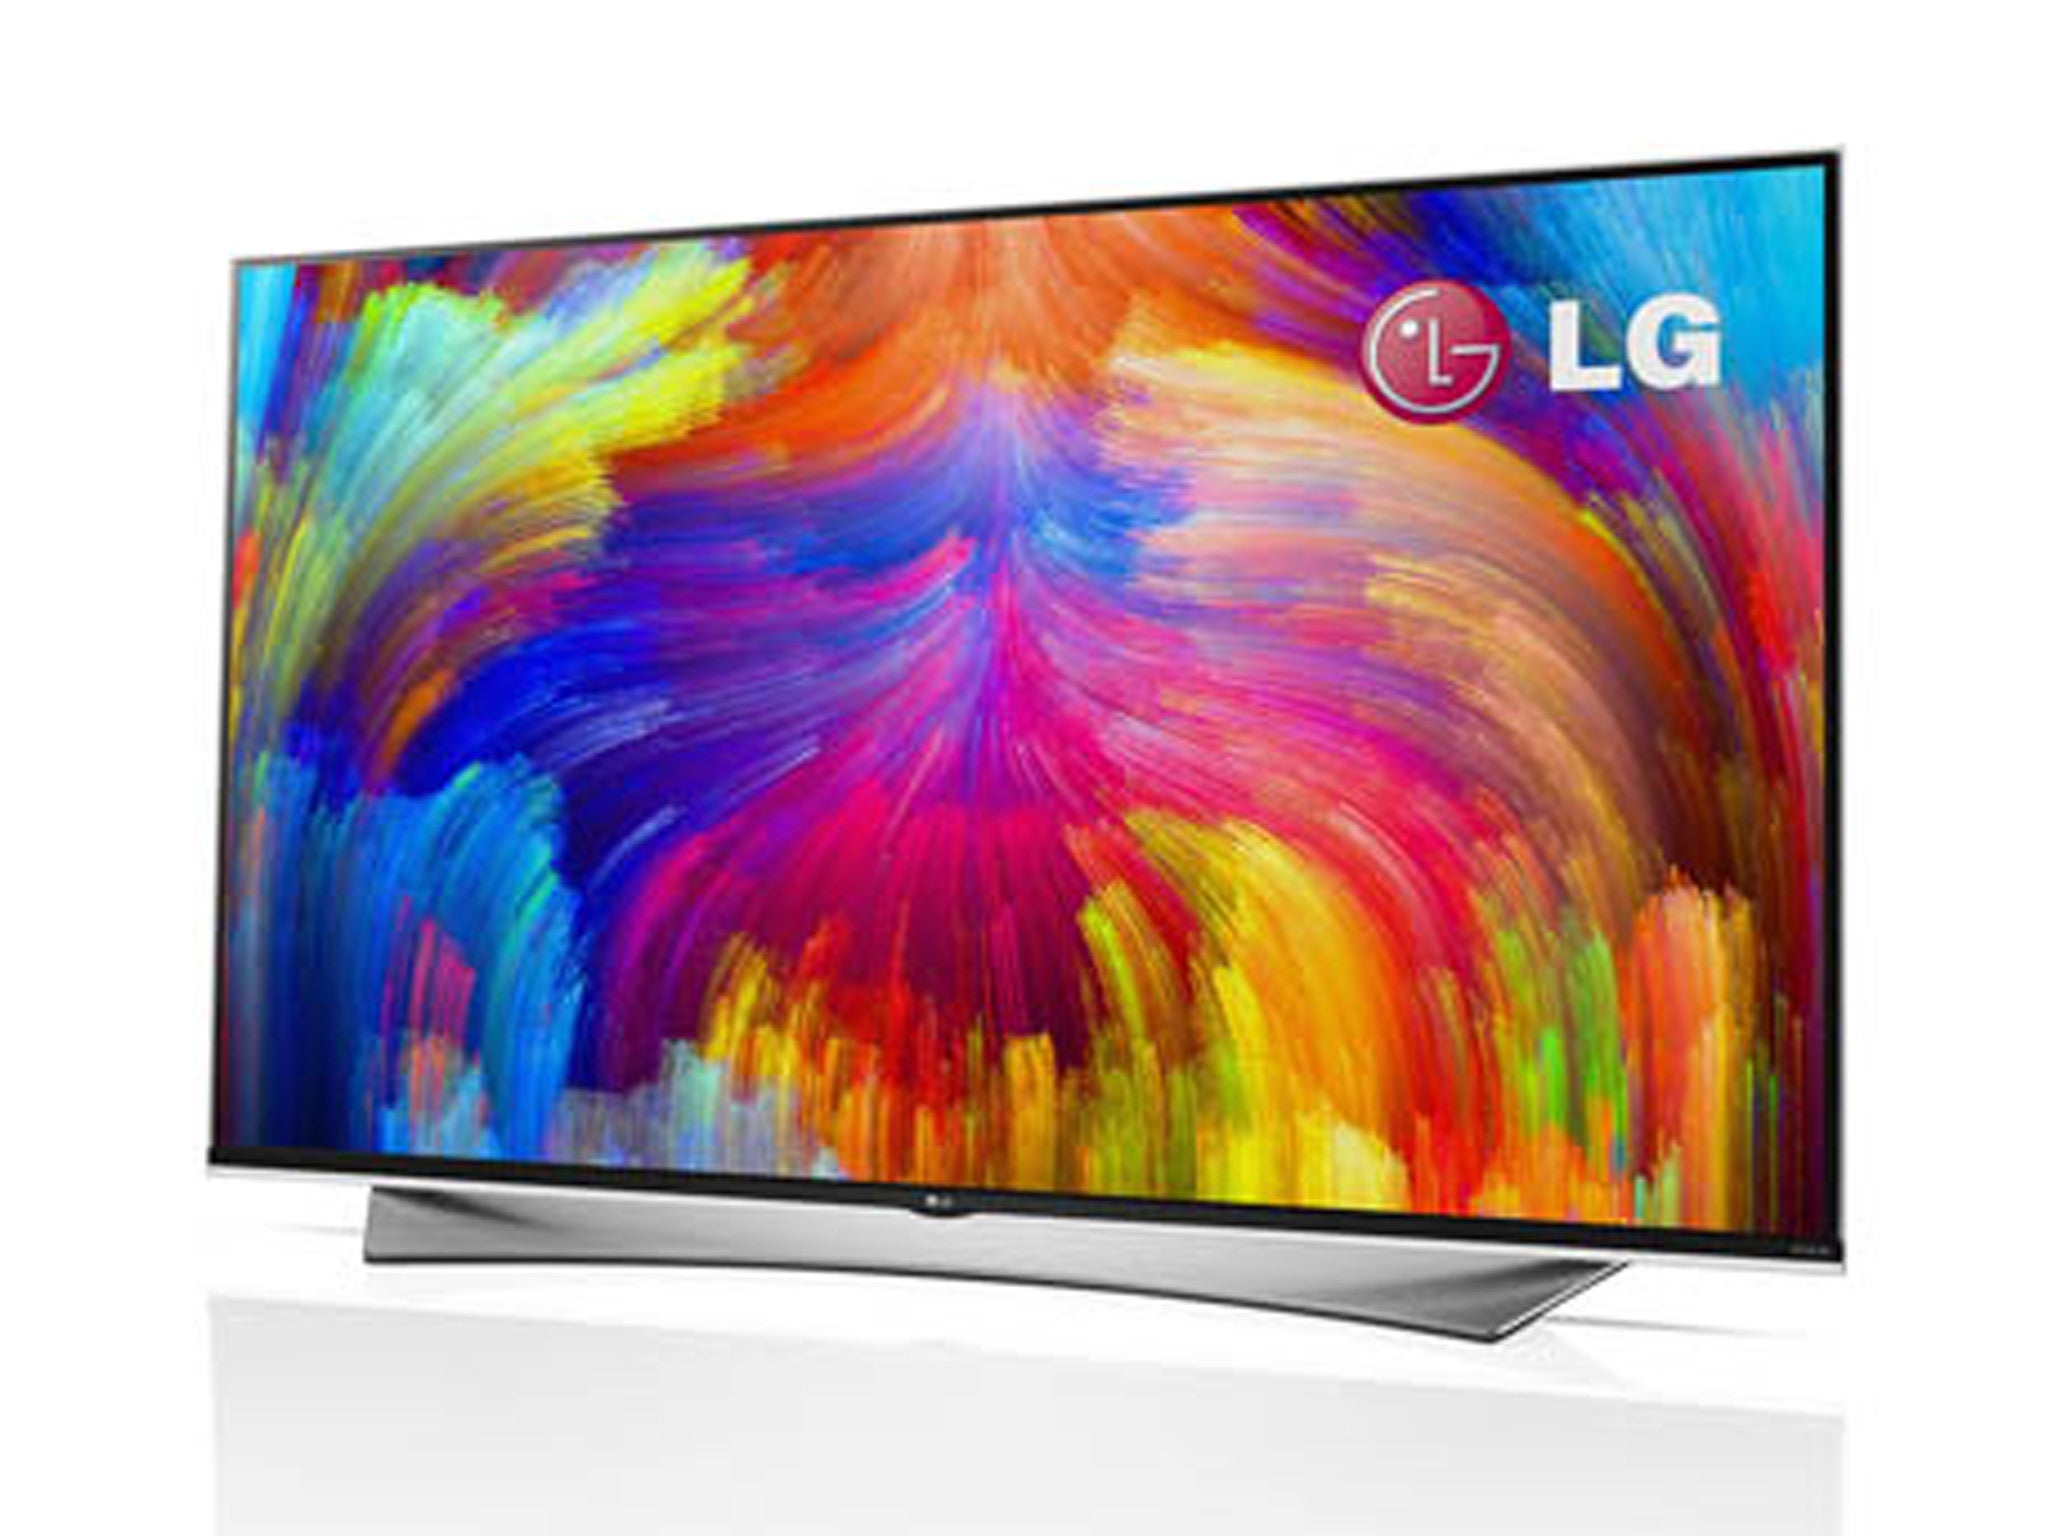 LG says that the TV's colour is improved by more than 30%